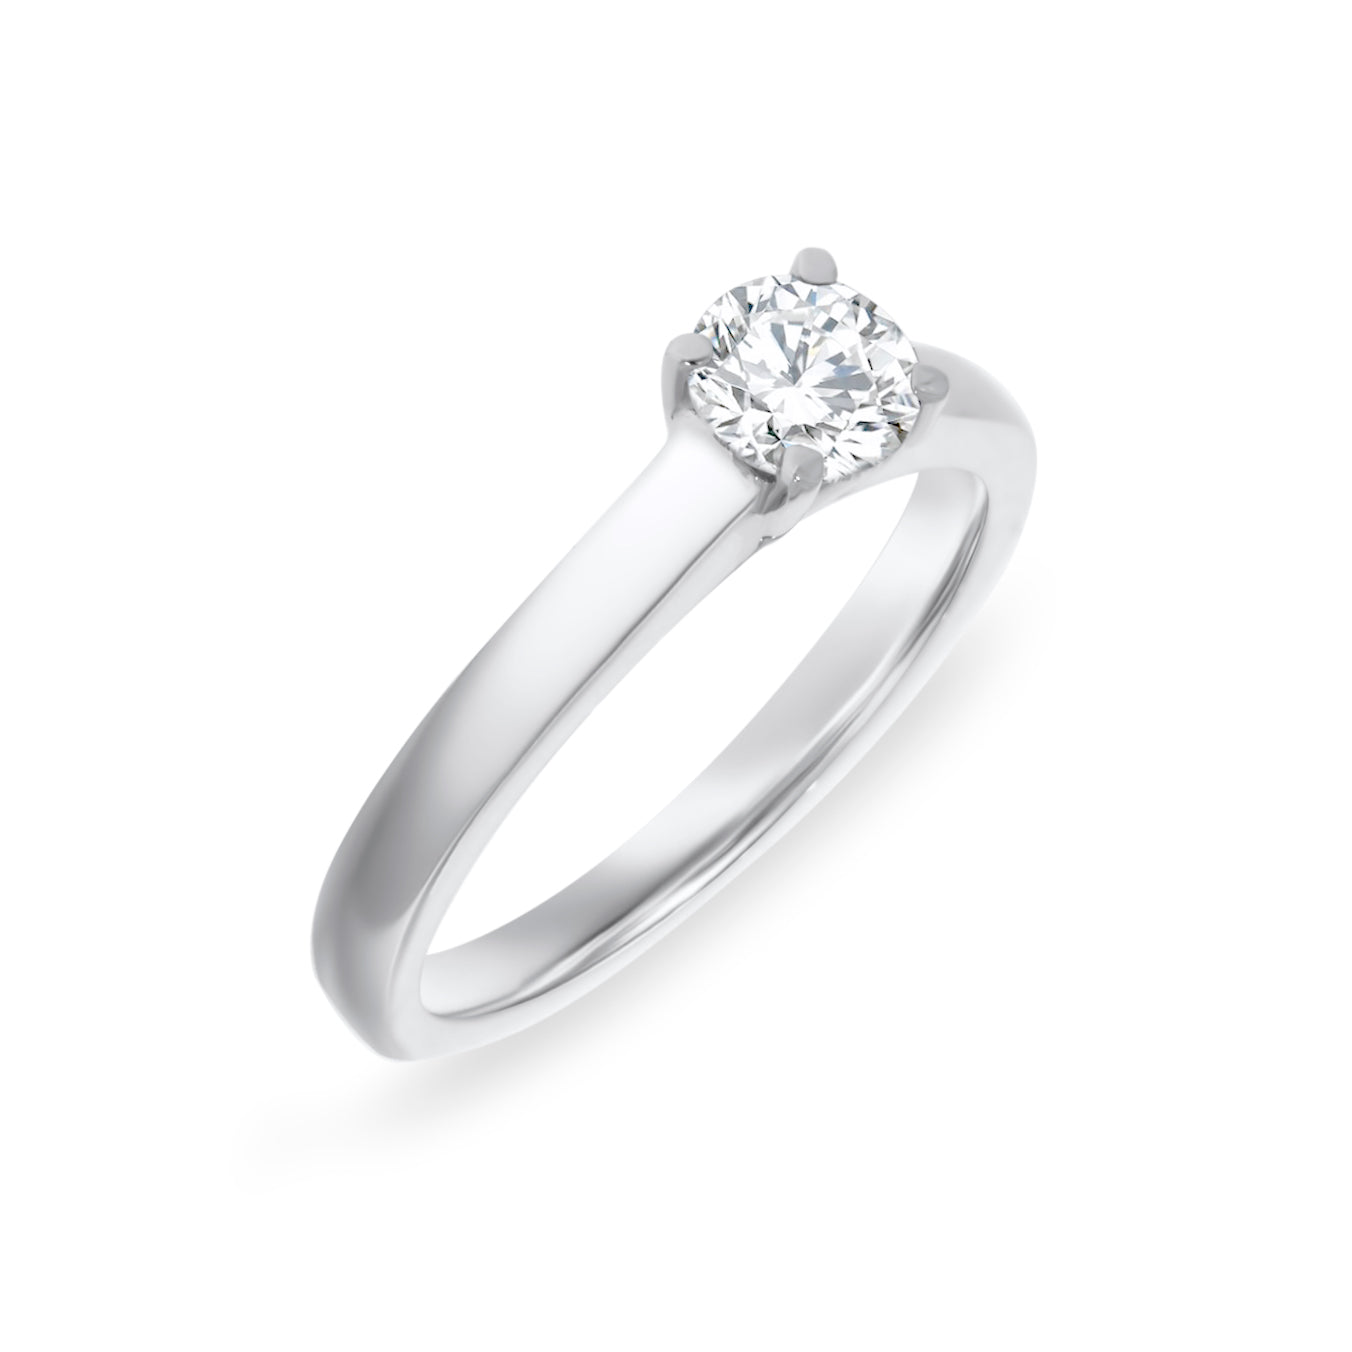 White Gold Diamond Solitaire Ring